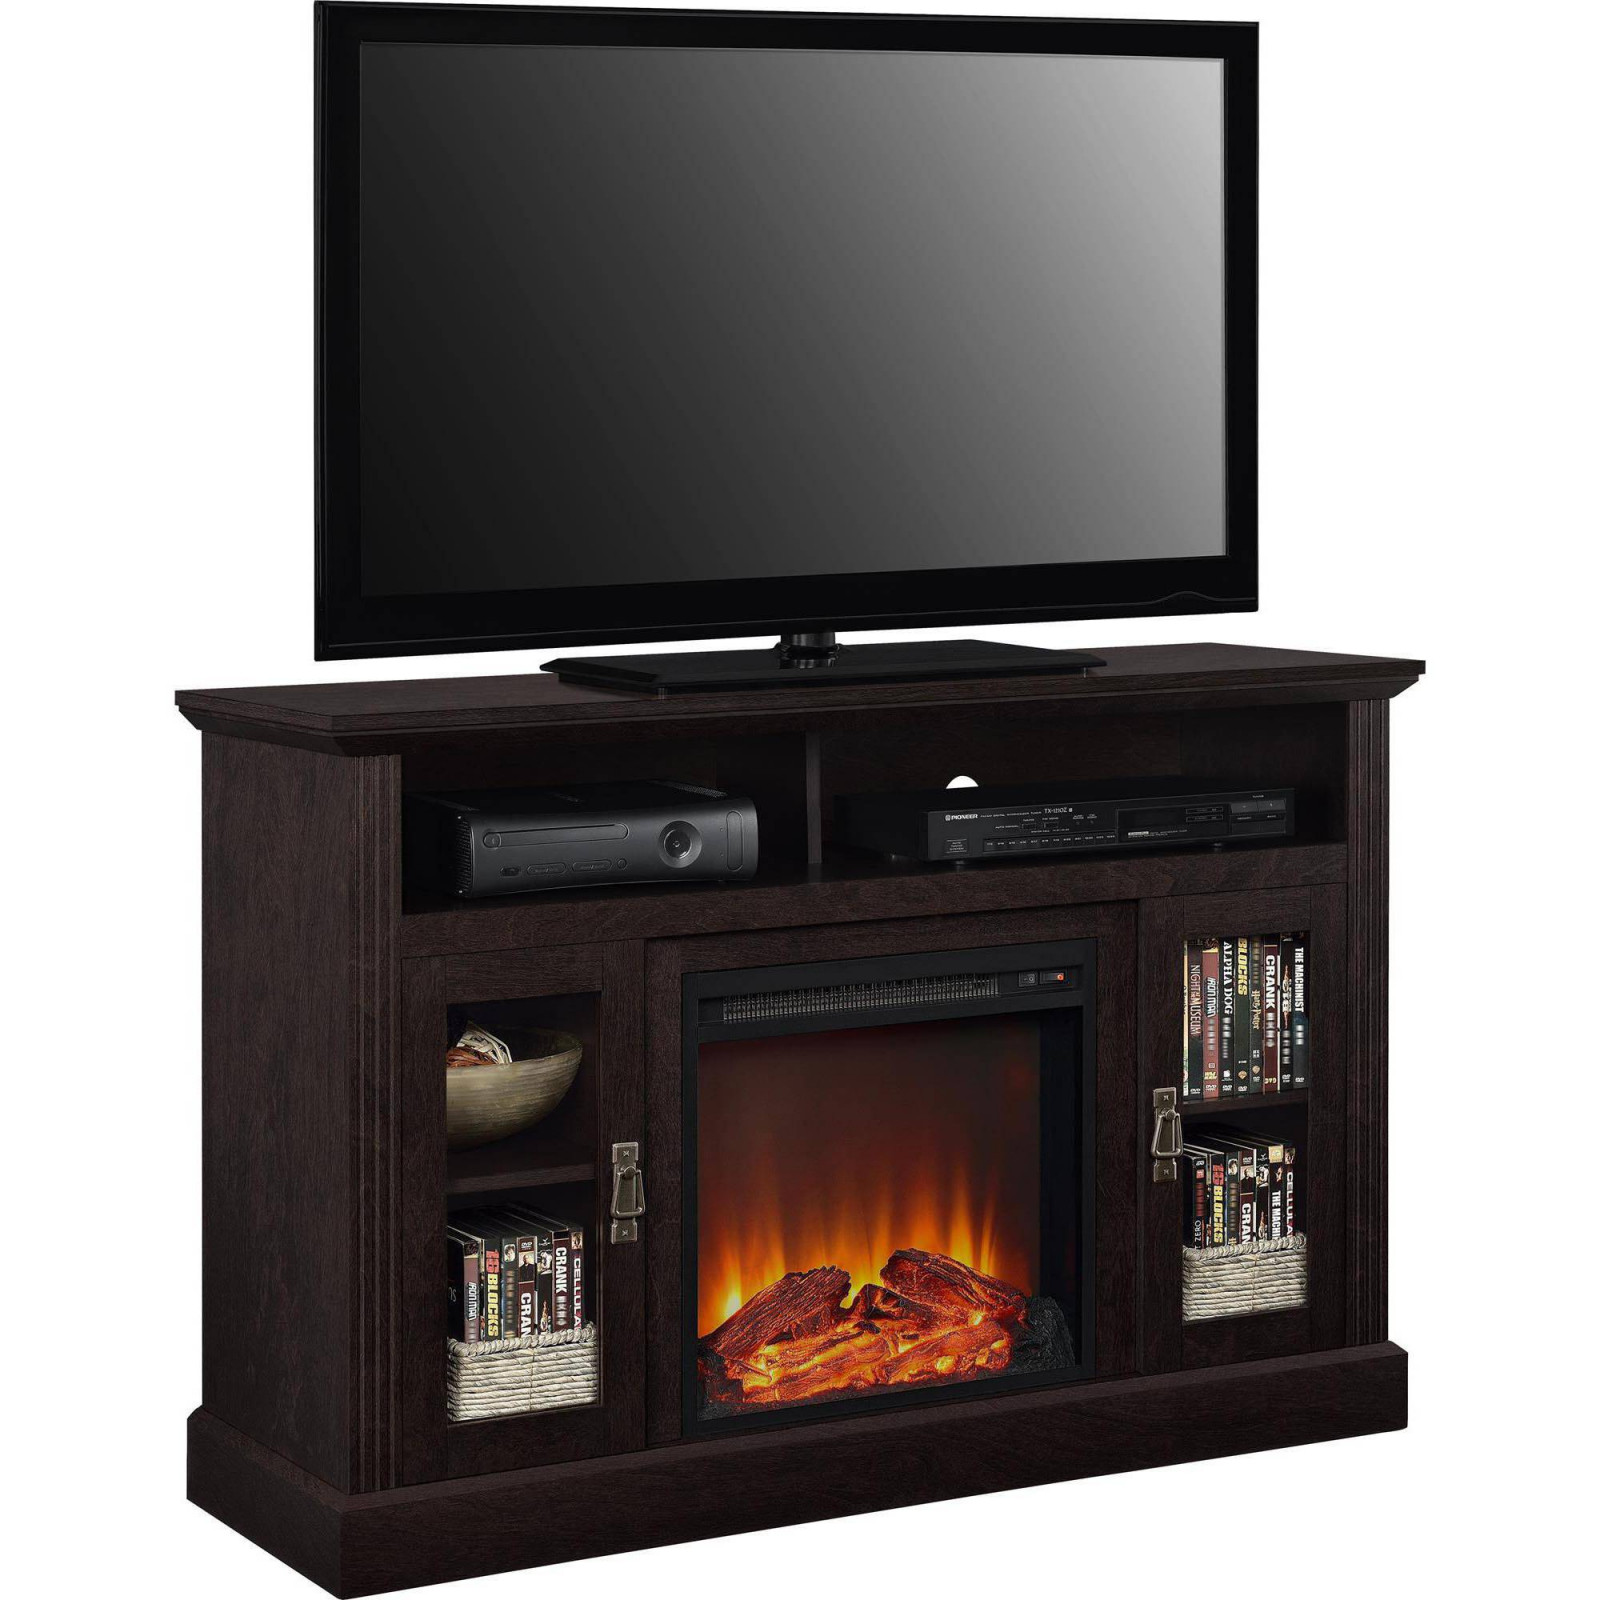 White Fireplace Tv Stand Fresh 35 Minimaliste Electric Fireplace Tv Stand